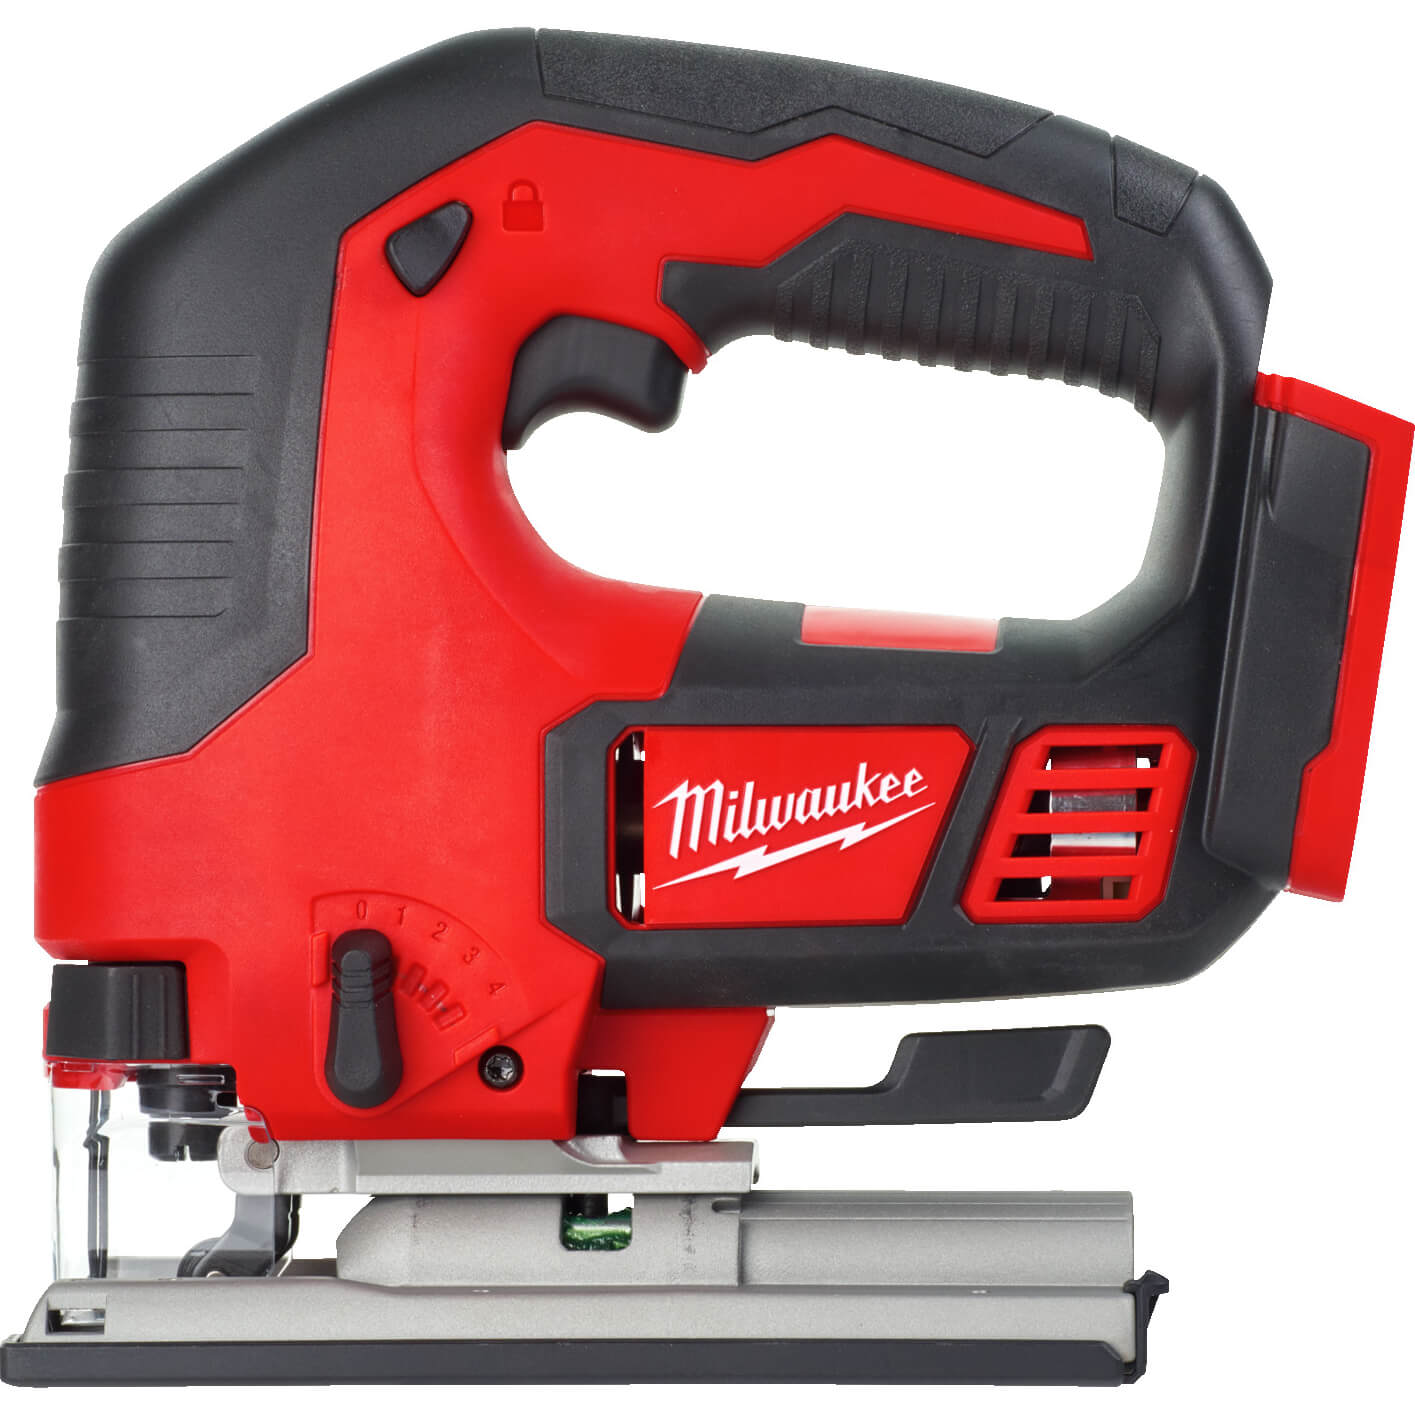 Image of Milwaukee M18 BJS 18v Cordless Top Handle Jigsaw No Batteries No Charger No Case